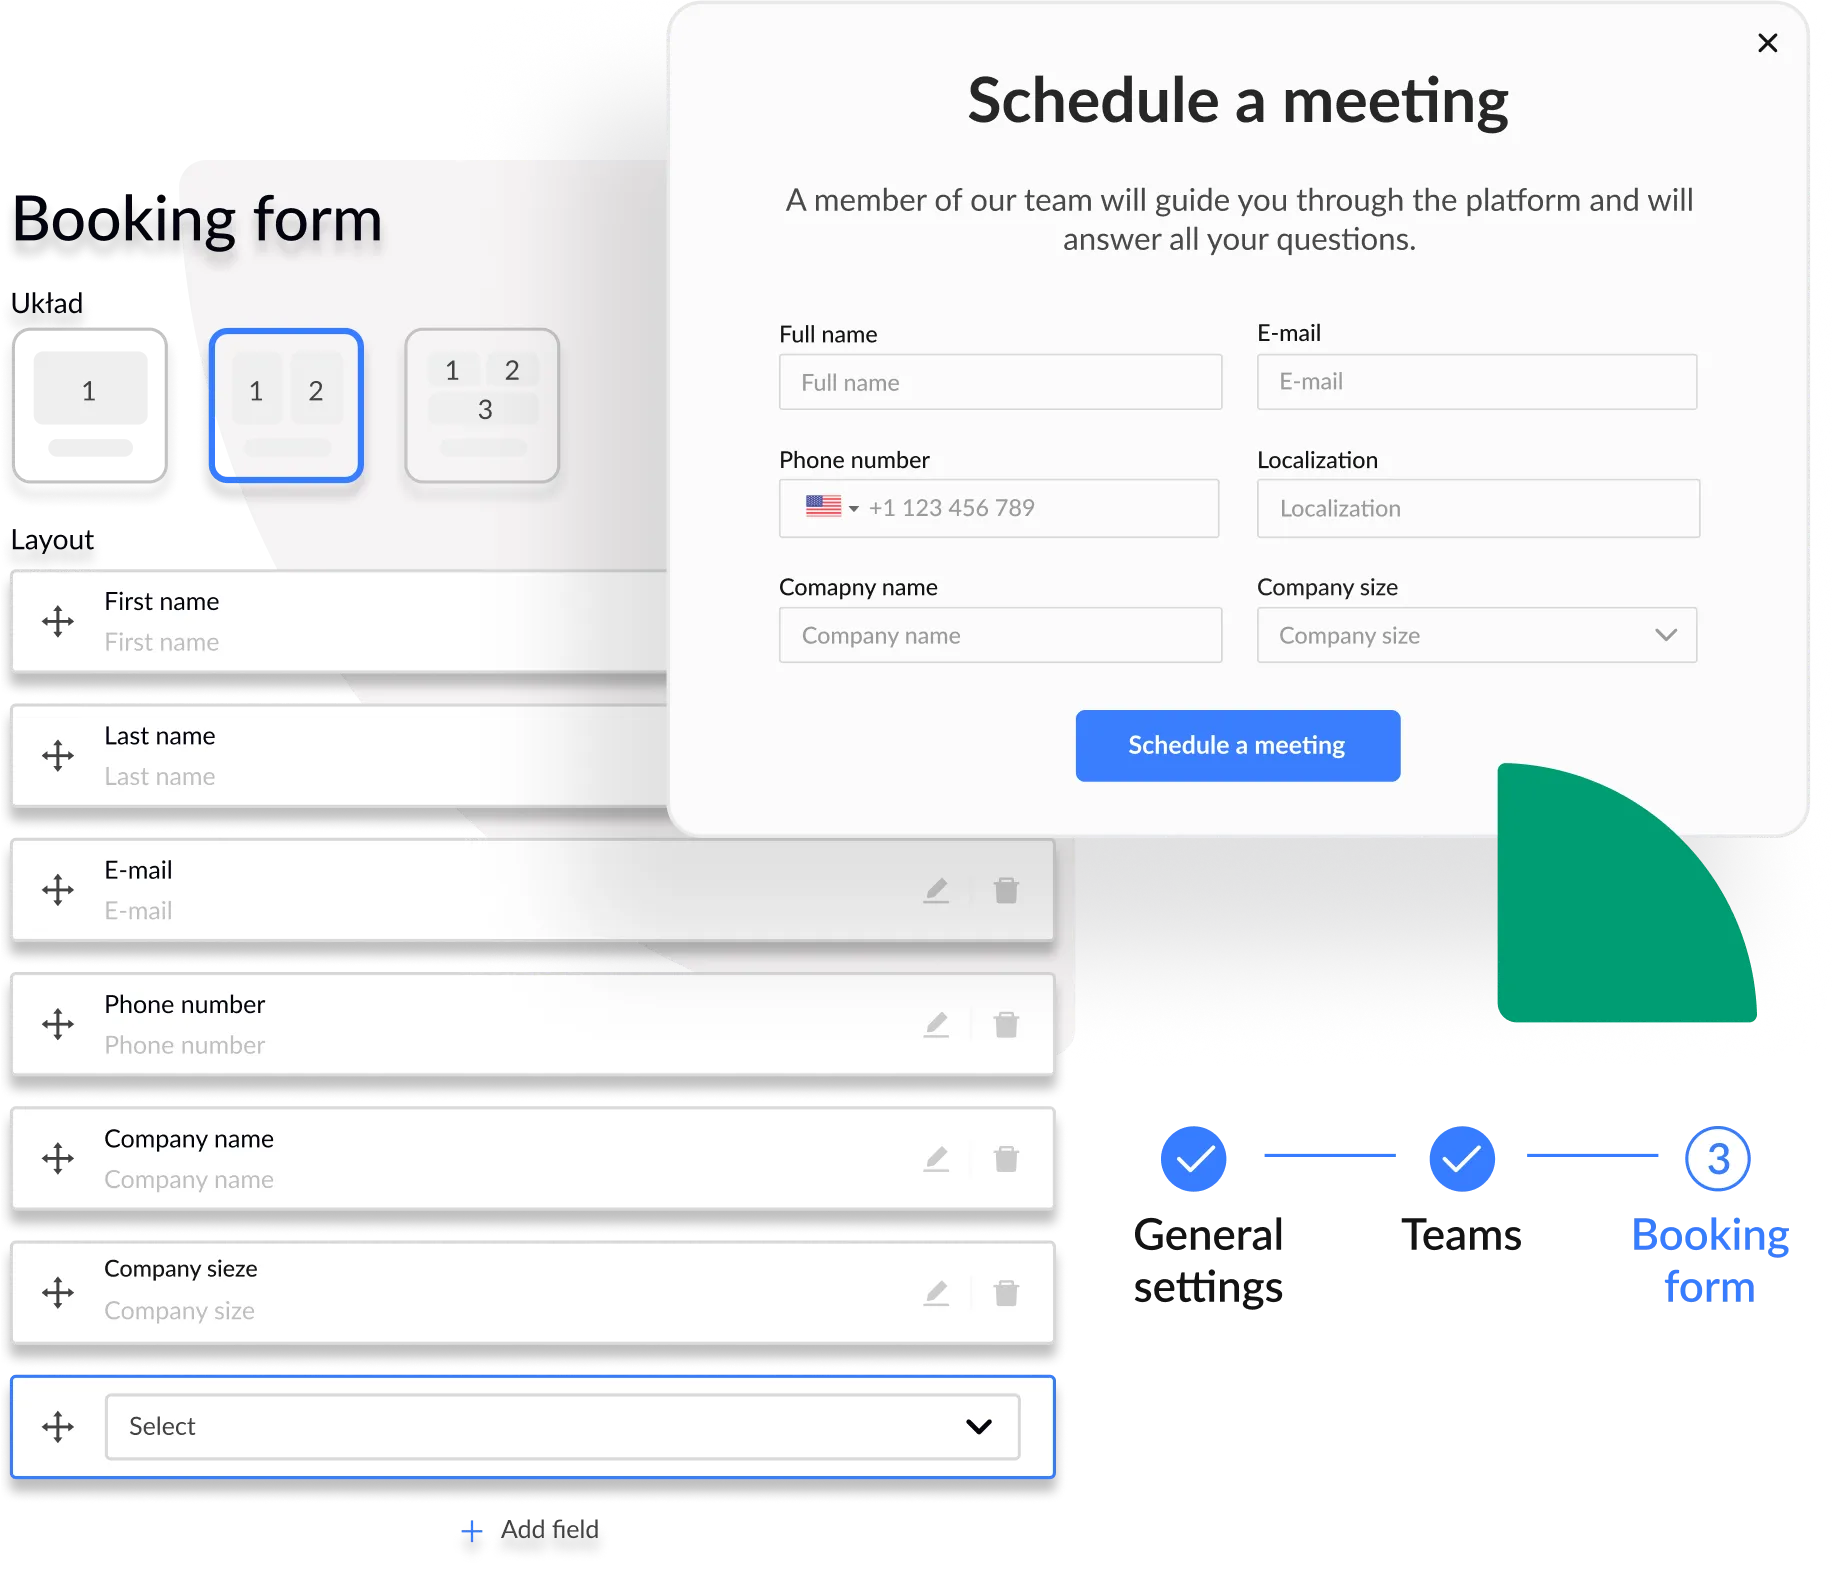 The process of creating a meeting scheduling widget and customizing booking form options.